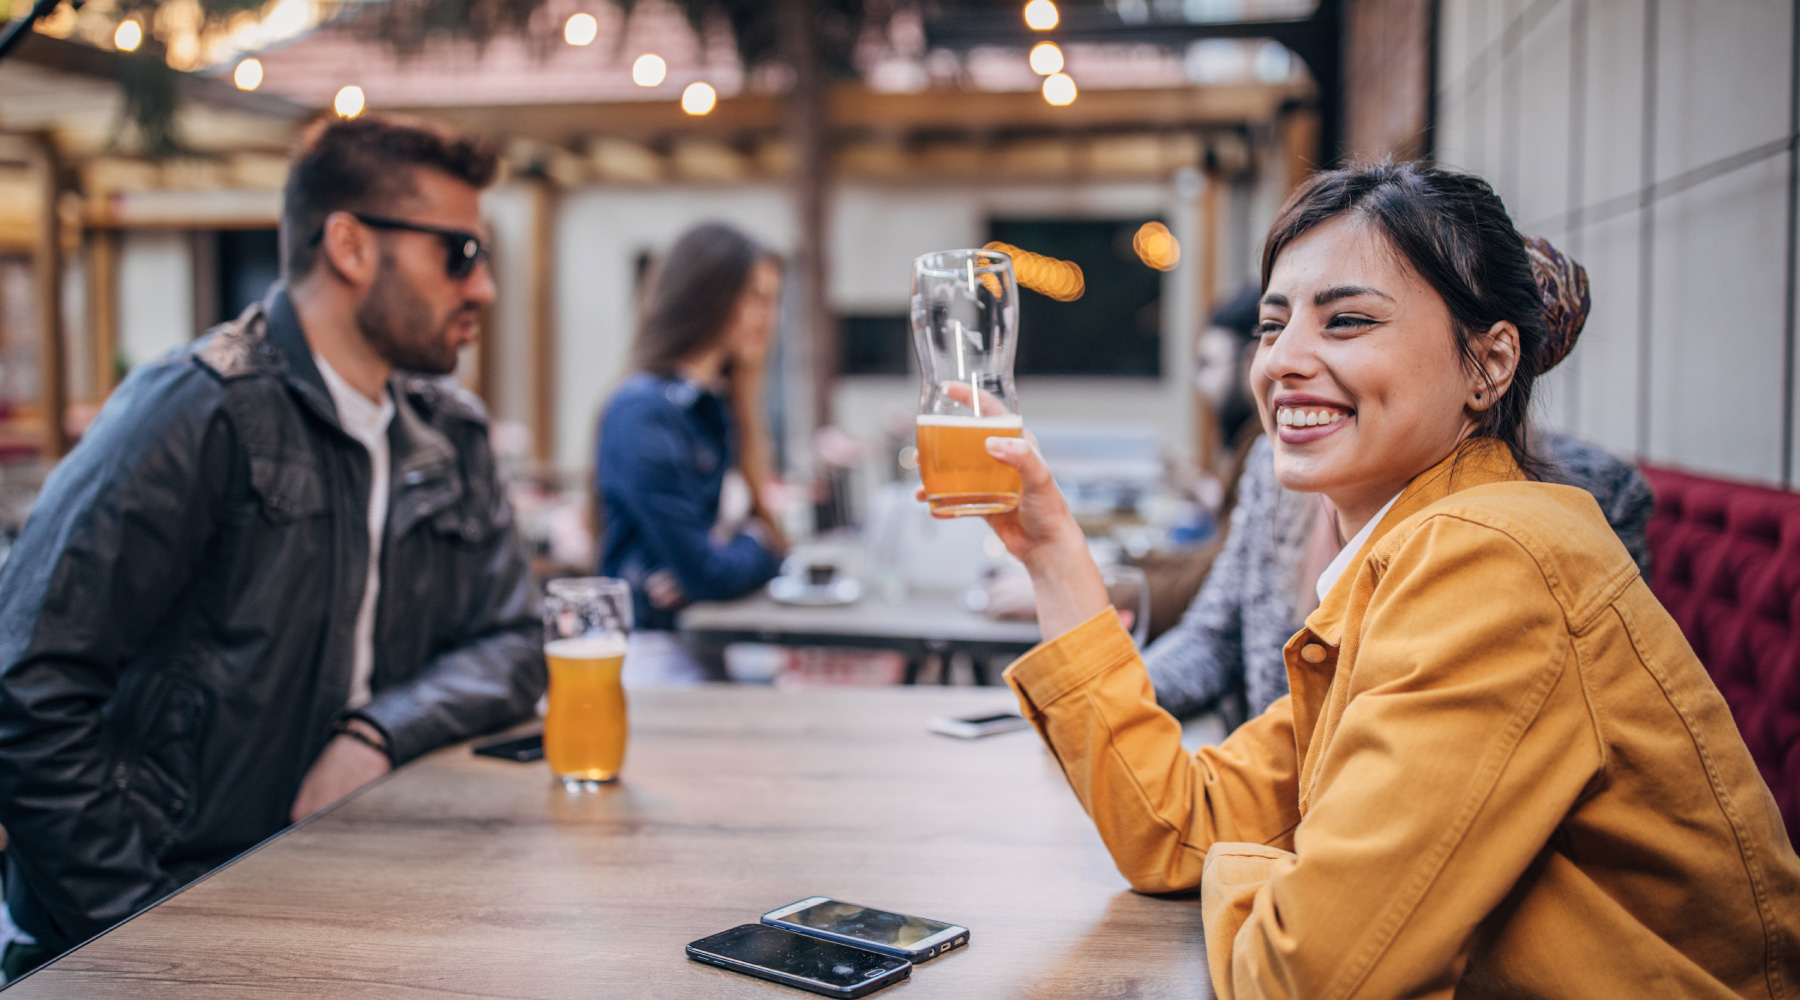 Woman smiling and enjoying a beer at a restaurant